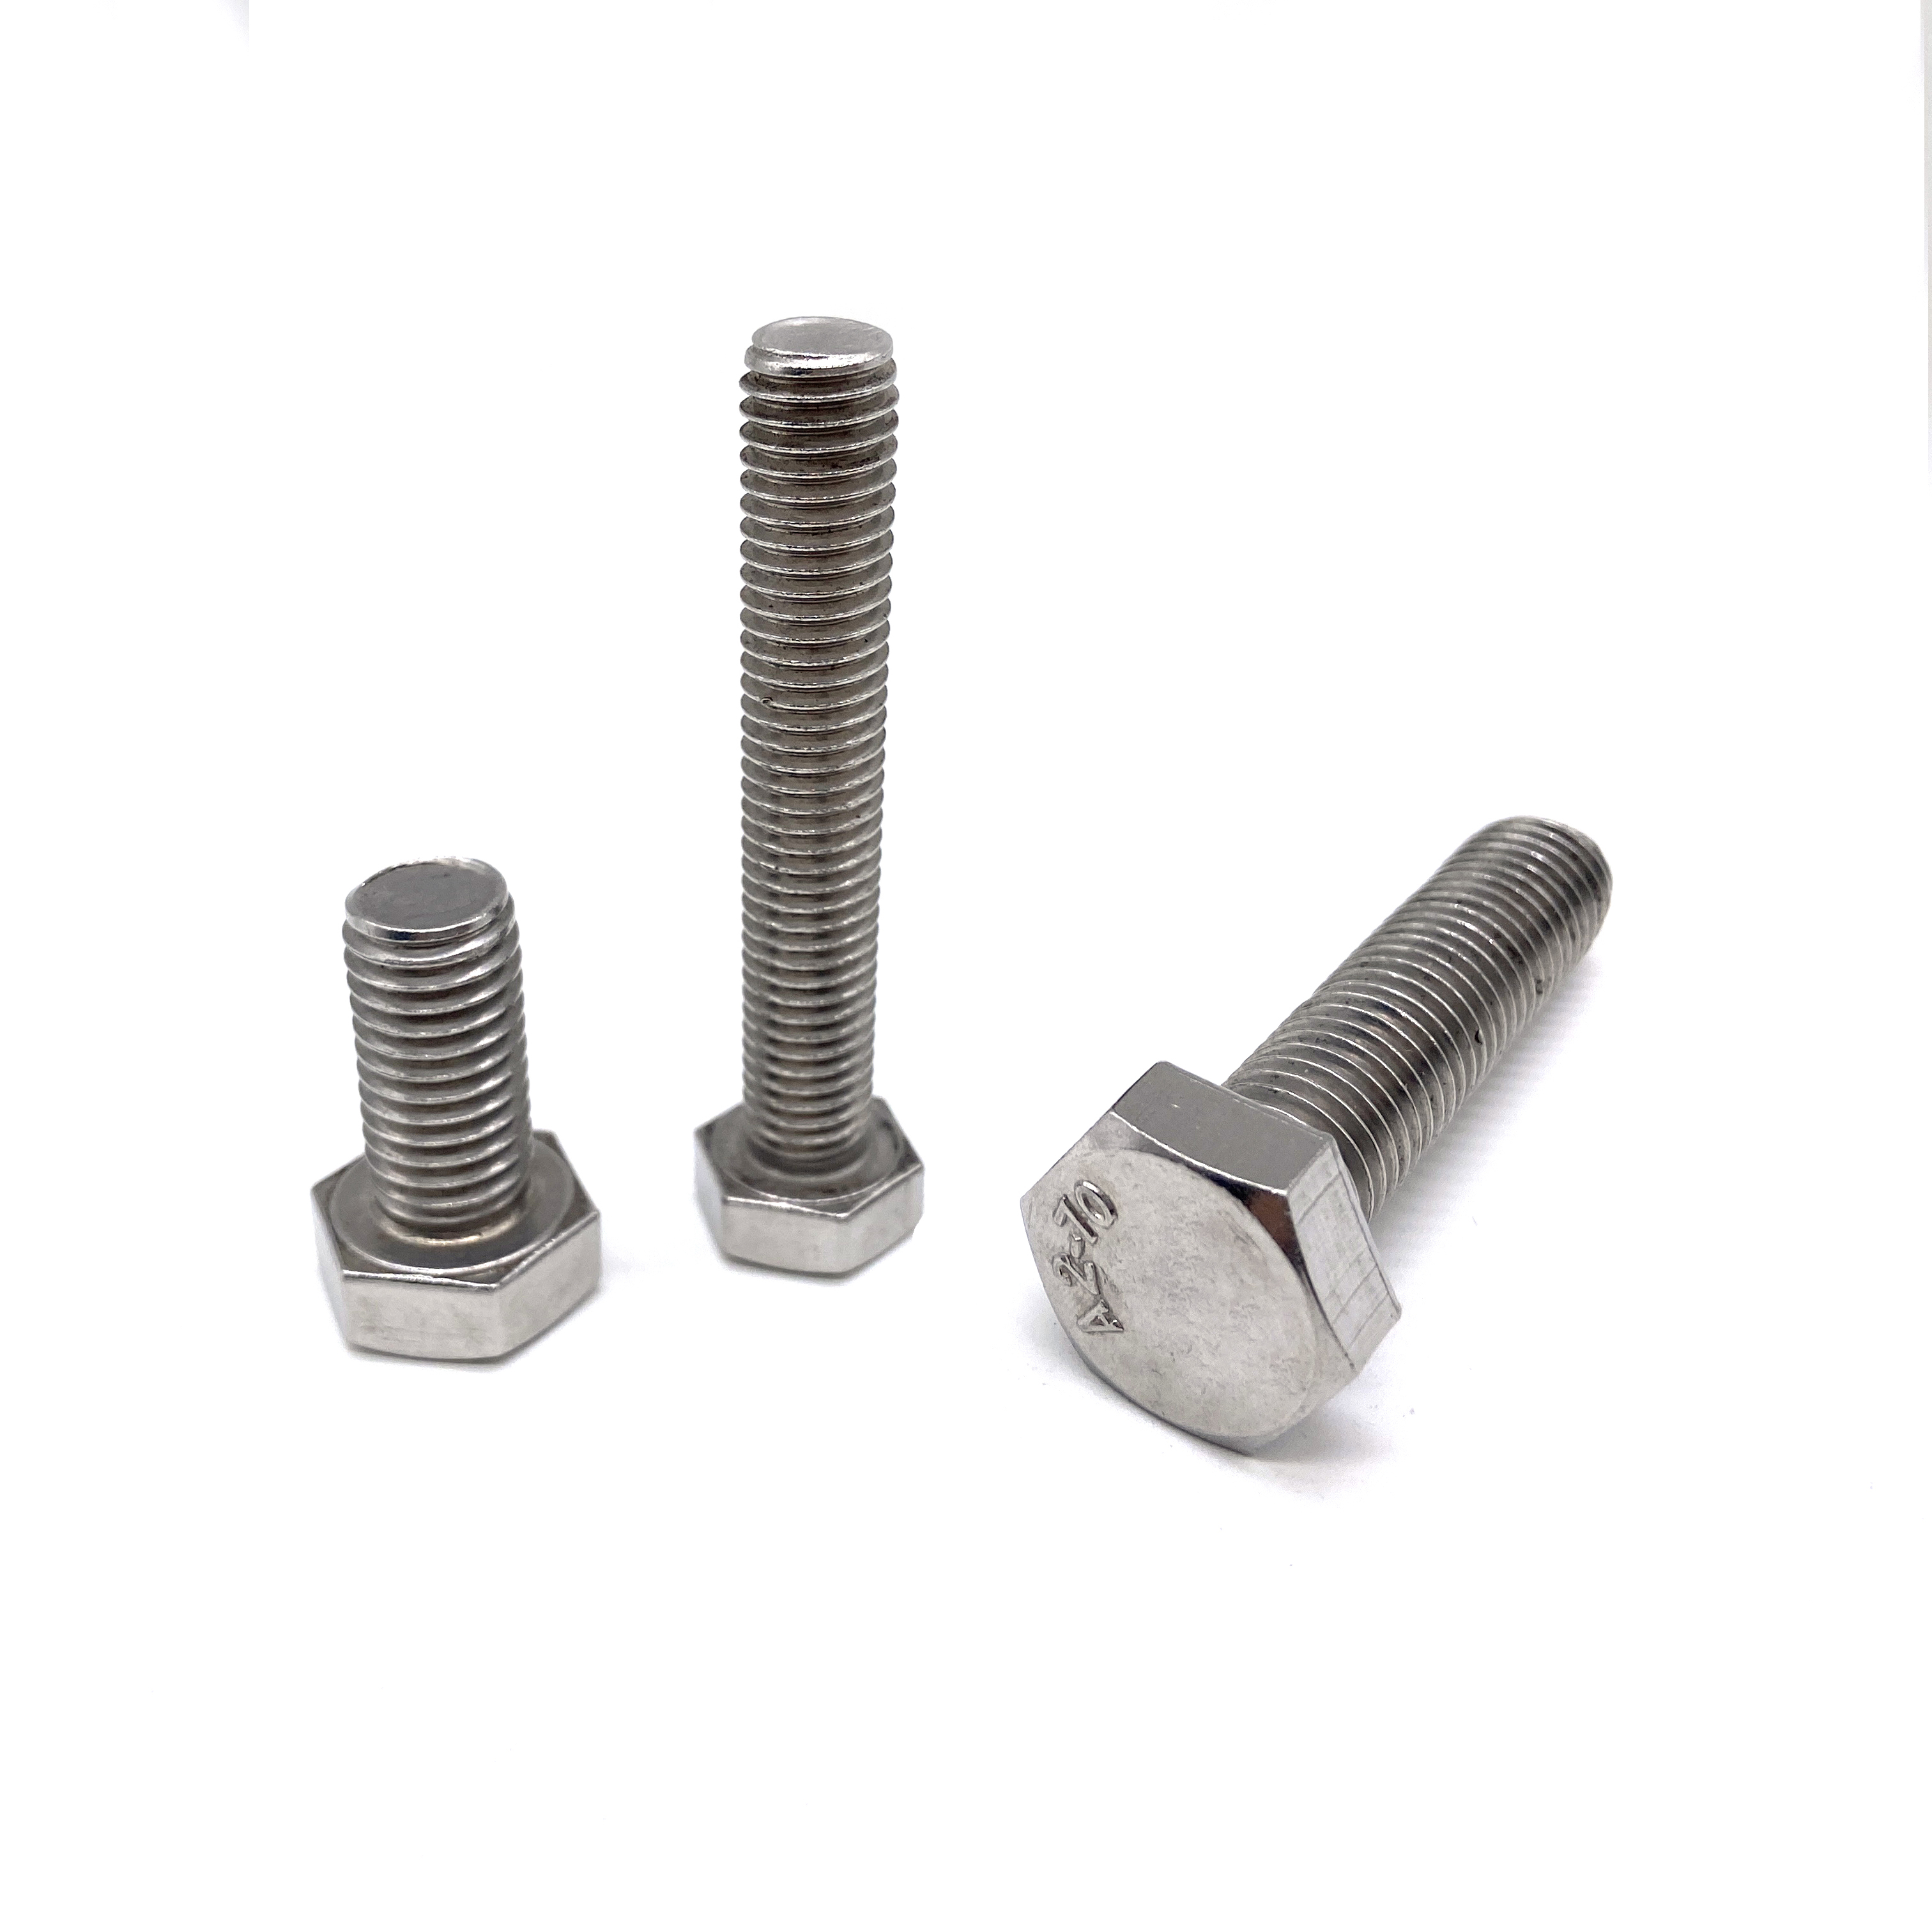 DIN933 M5 M10 M12 M8 A2-70 Stainless Steel Hex Bolts - Buy m10